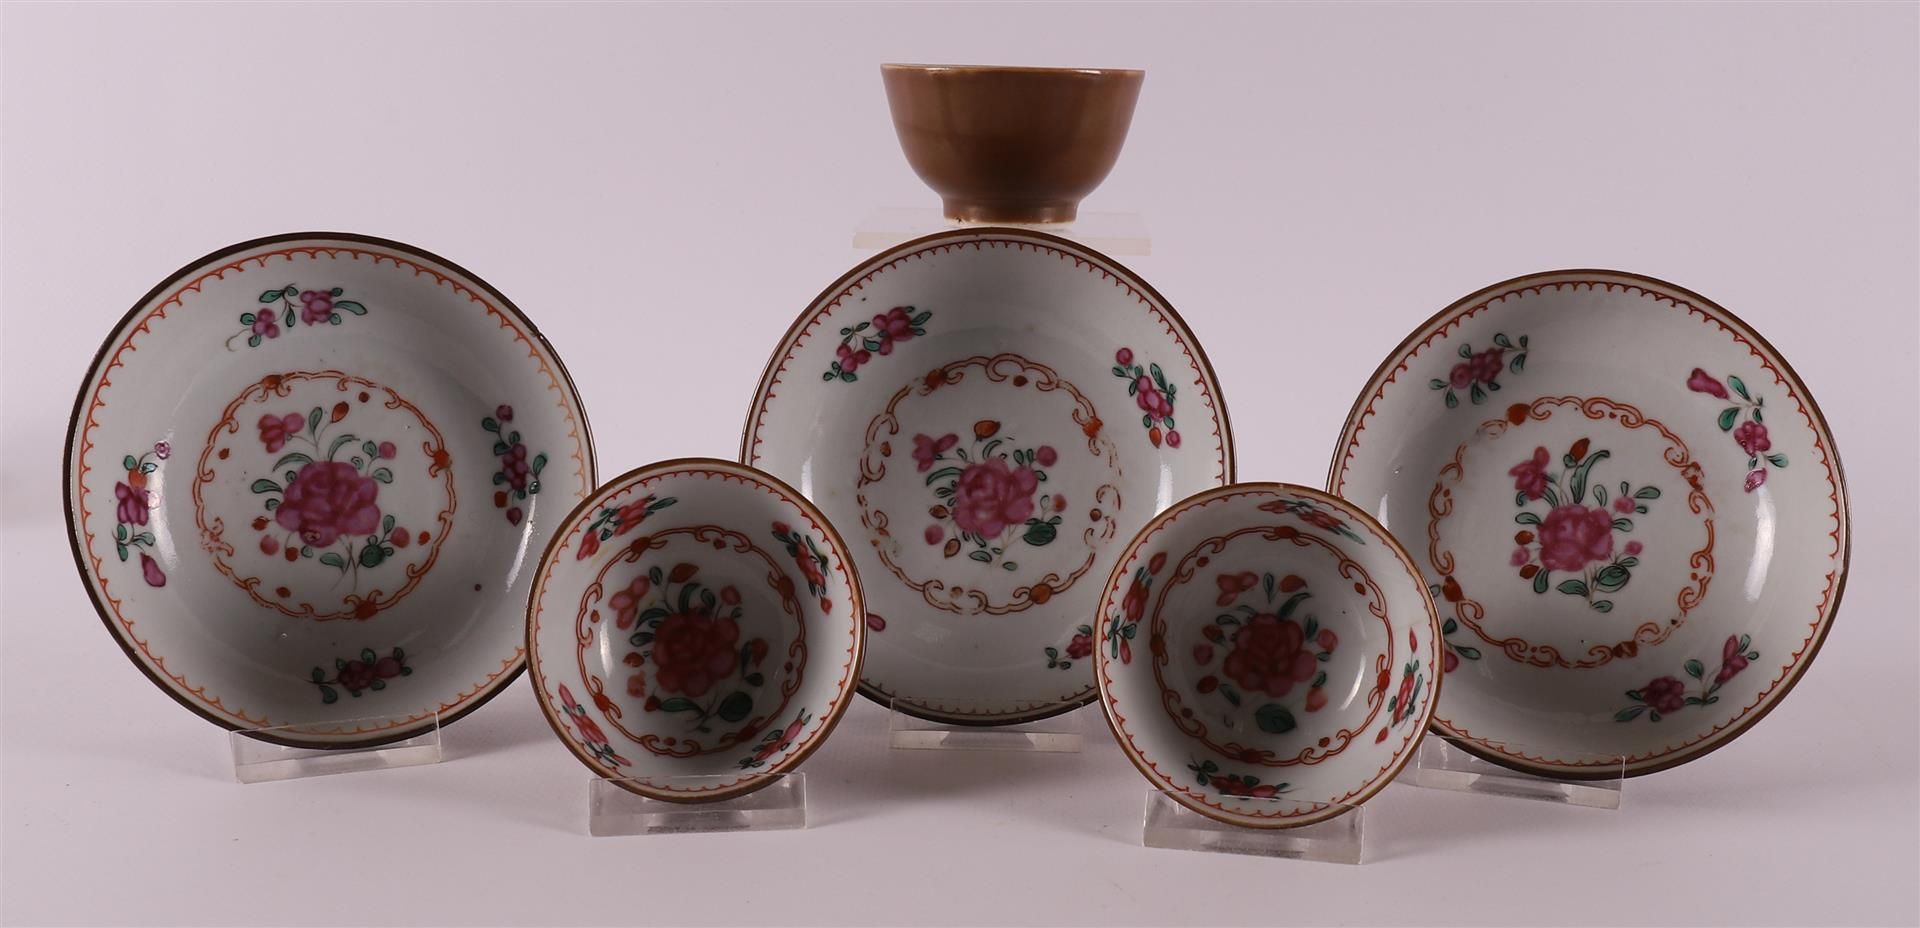 Three famille rose cups and saucers on capucine ground, China, Qianlong, 18th ce